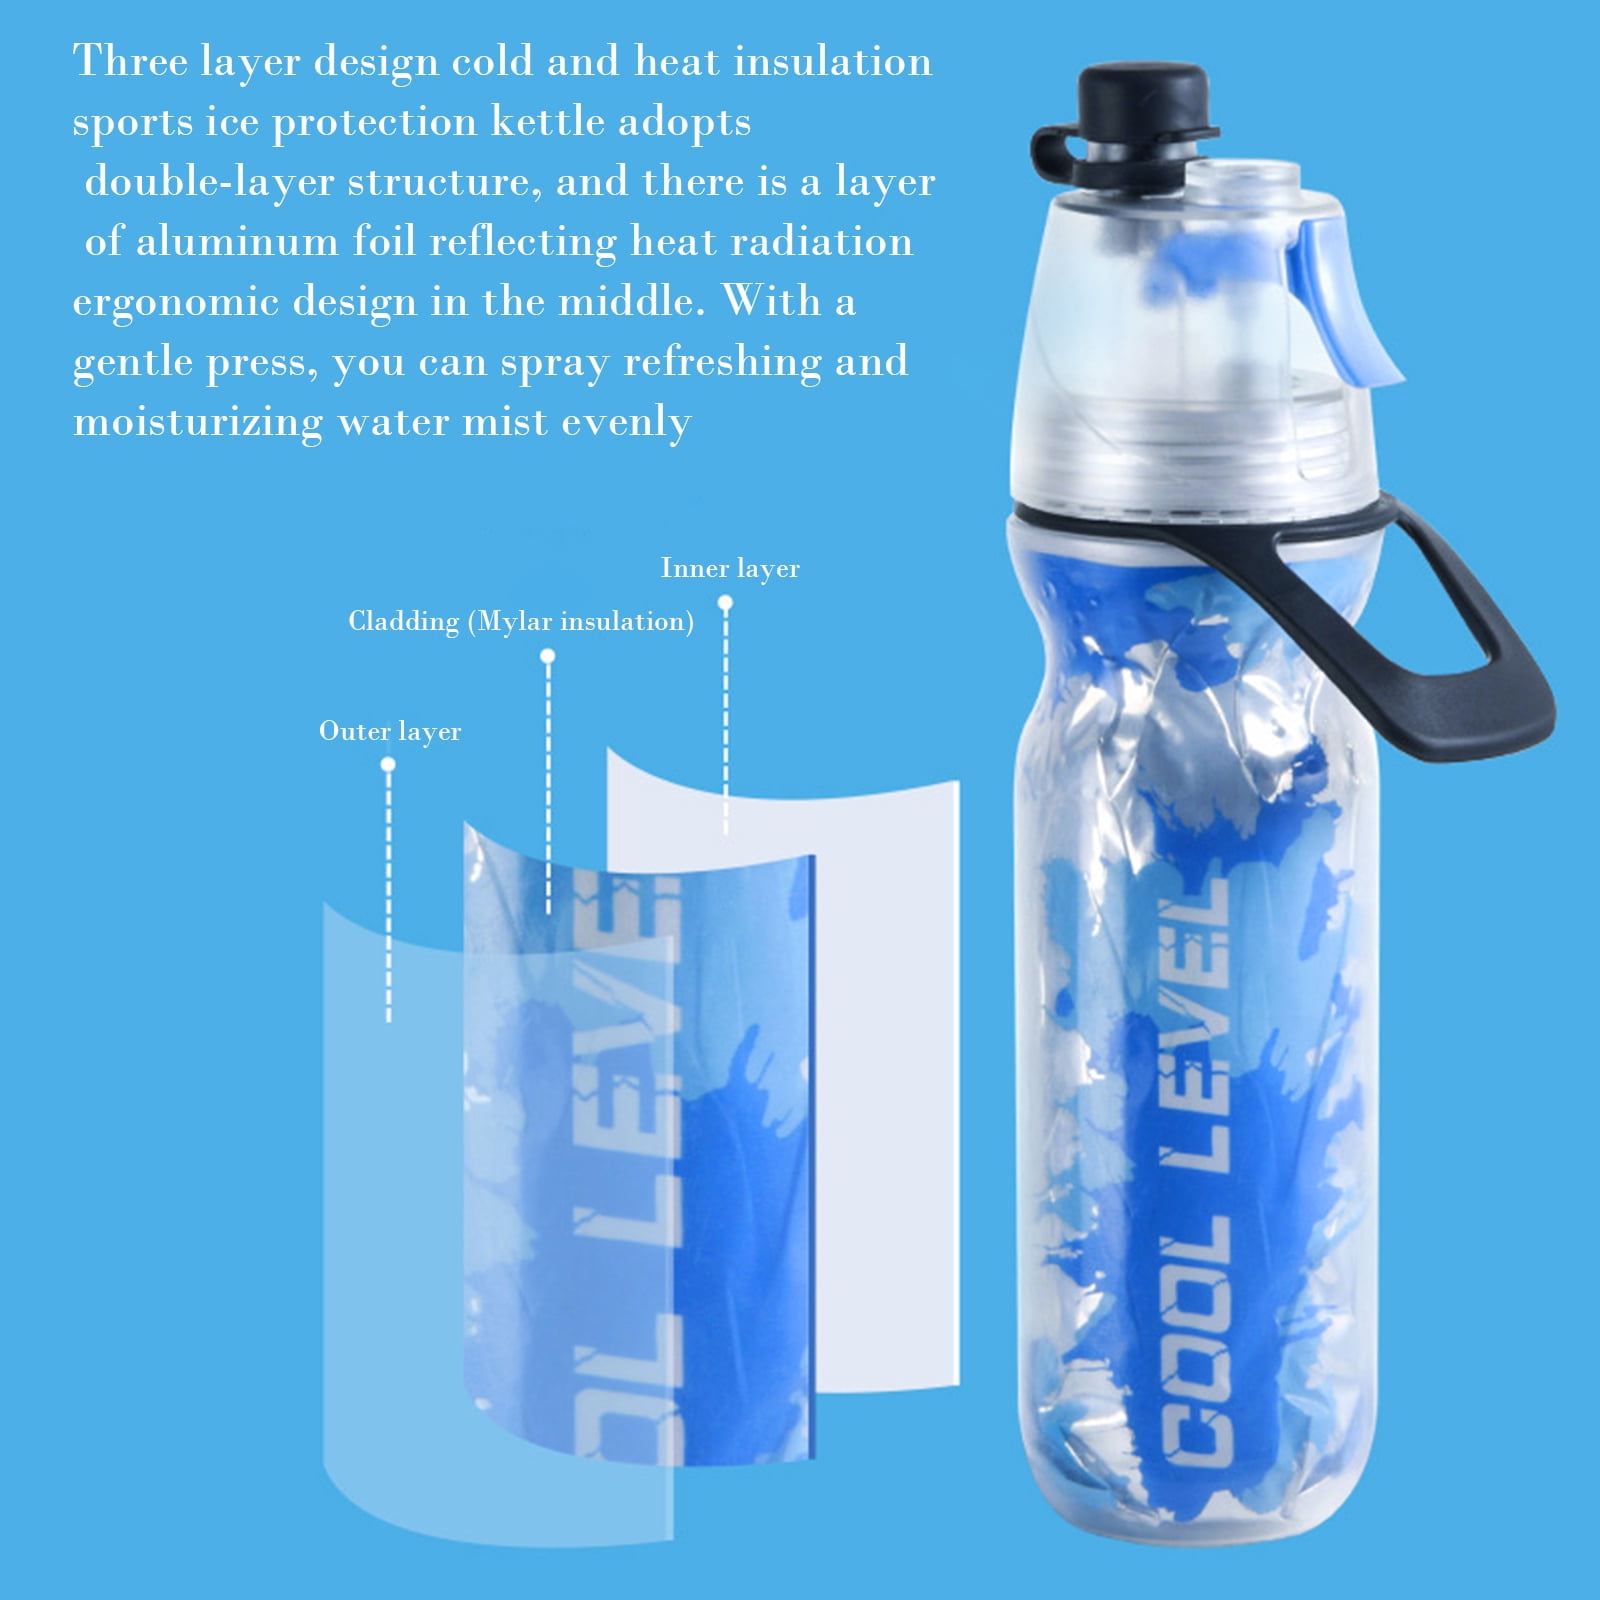 Misting Water Bottle - Insulate Both Hot and Cold - Blue from Apollo Box